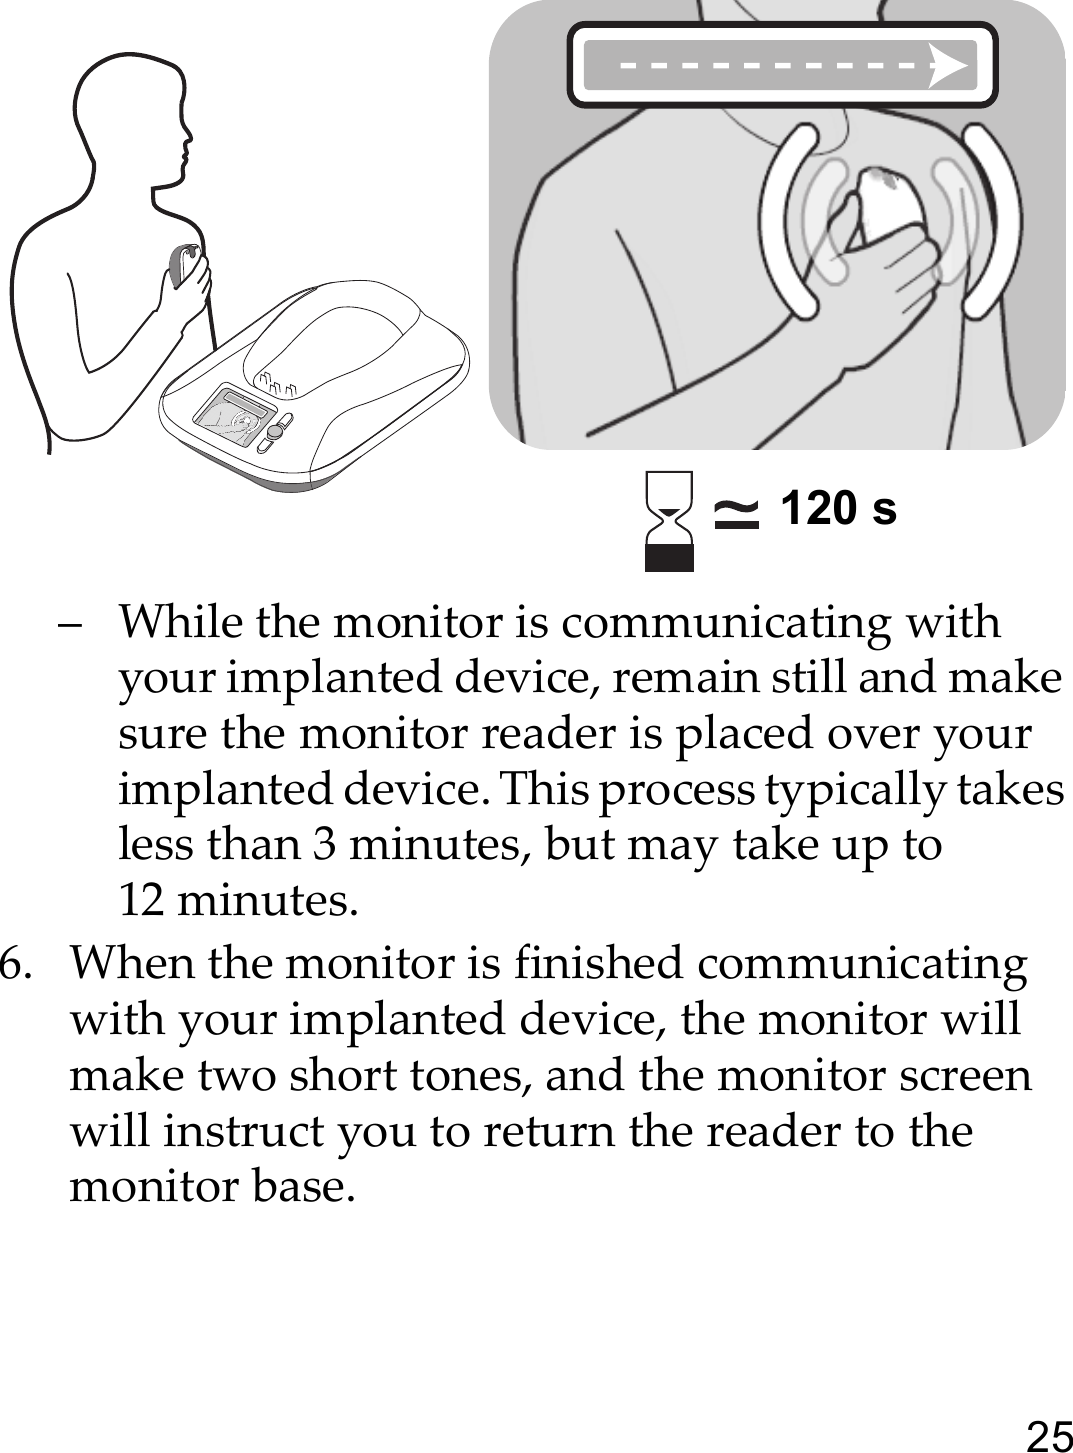 25– While the monitor is communicating with your implanted device, remain still and make sure the monitor reader is placed over your implanted device. This process typically takes less than 3 minutes, but may take up to 12 minutes. 6. When the monitor is finished communicating with your implanted device, the monitor will make two short tones, and the monitor screen will instruct you to return the reader to the monitor base.120 s